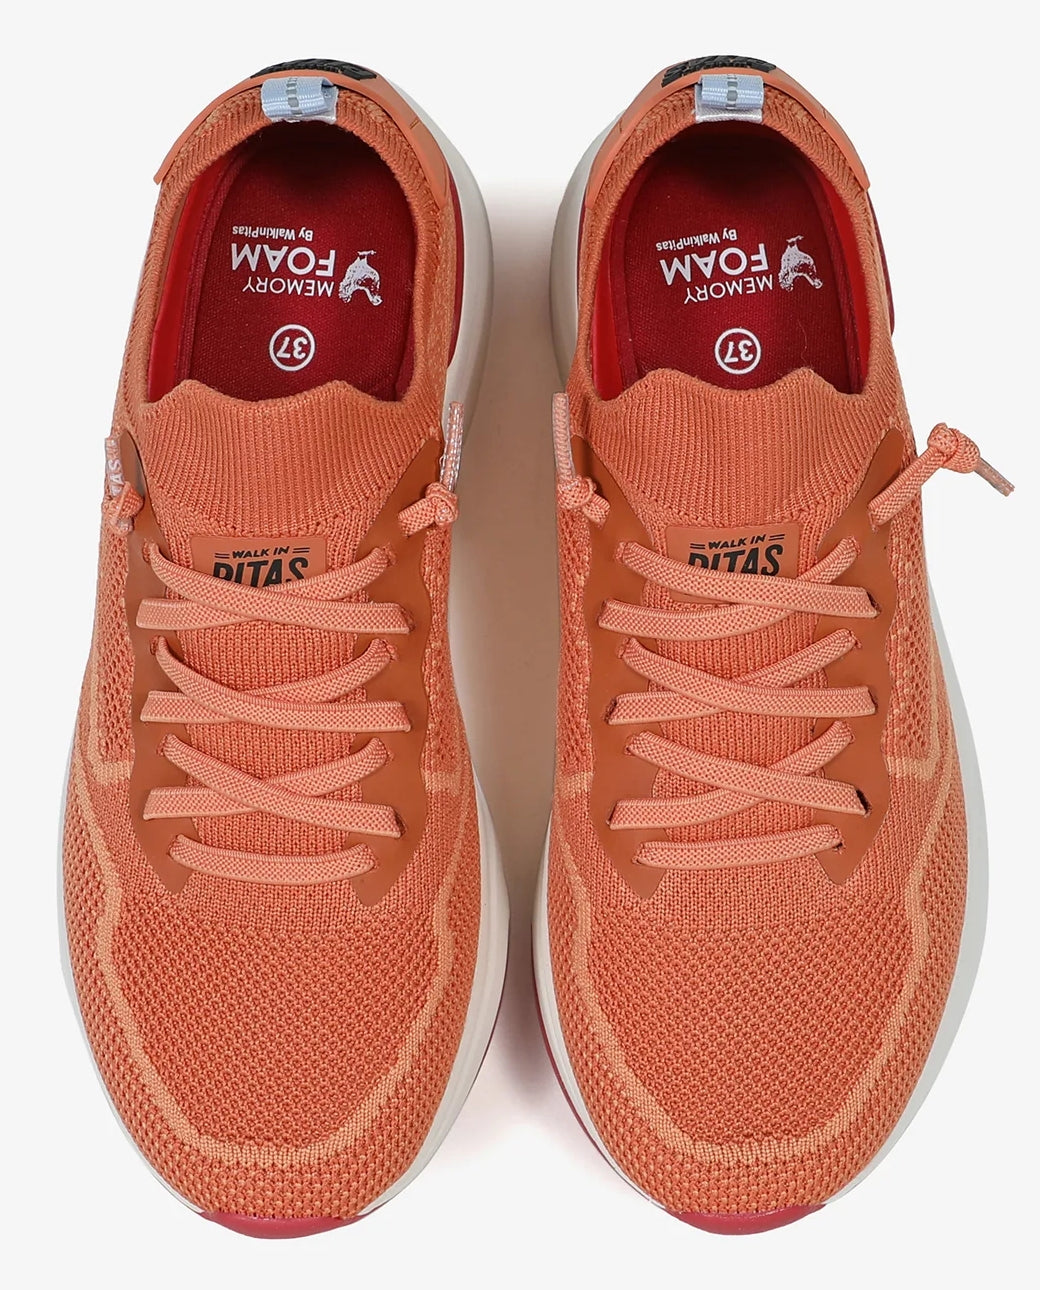 Women's Pitas Cue Orange mesh pull on trainers with memory foam insole.